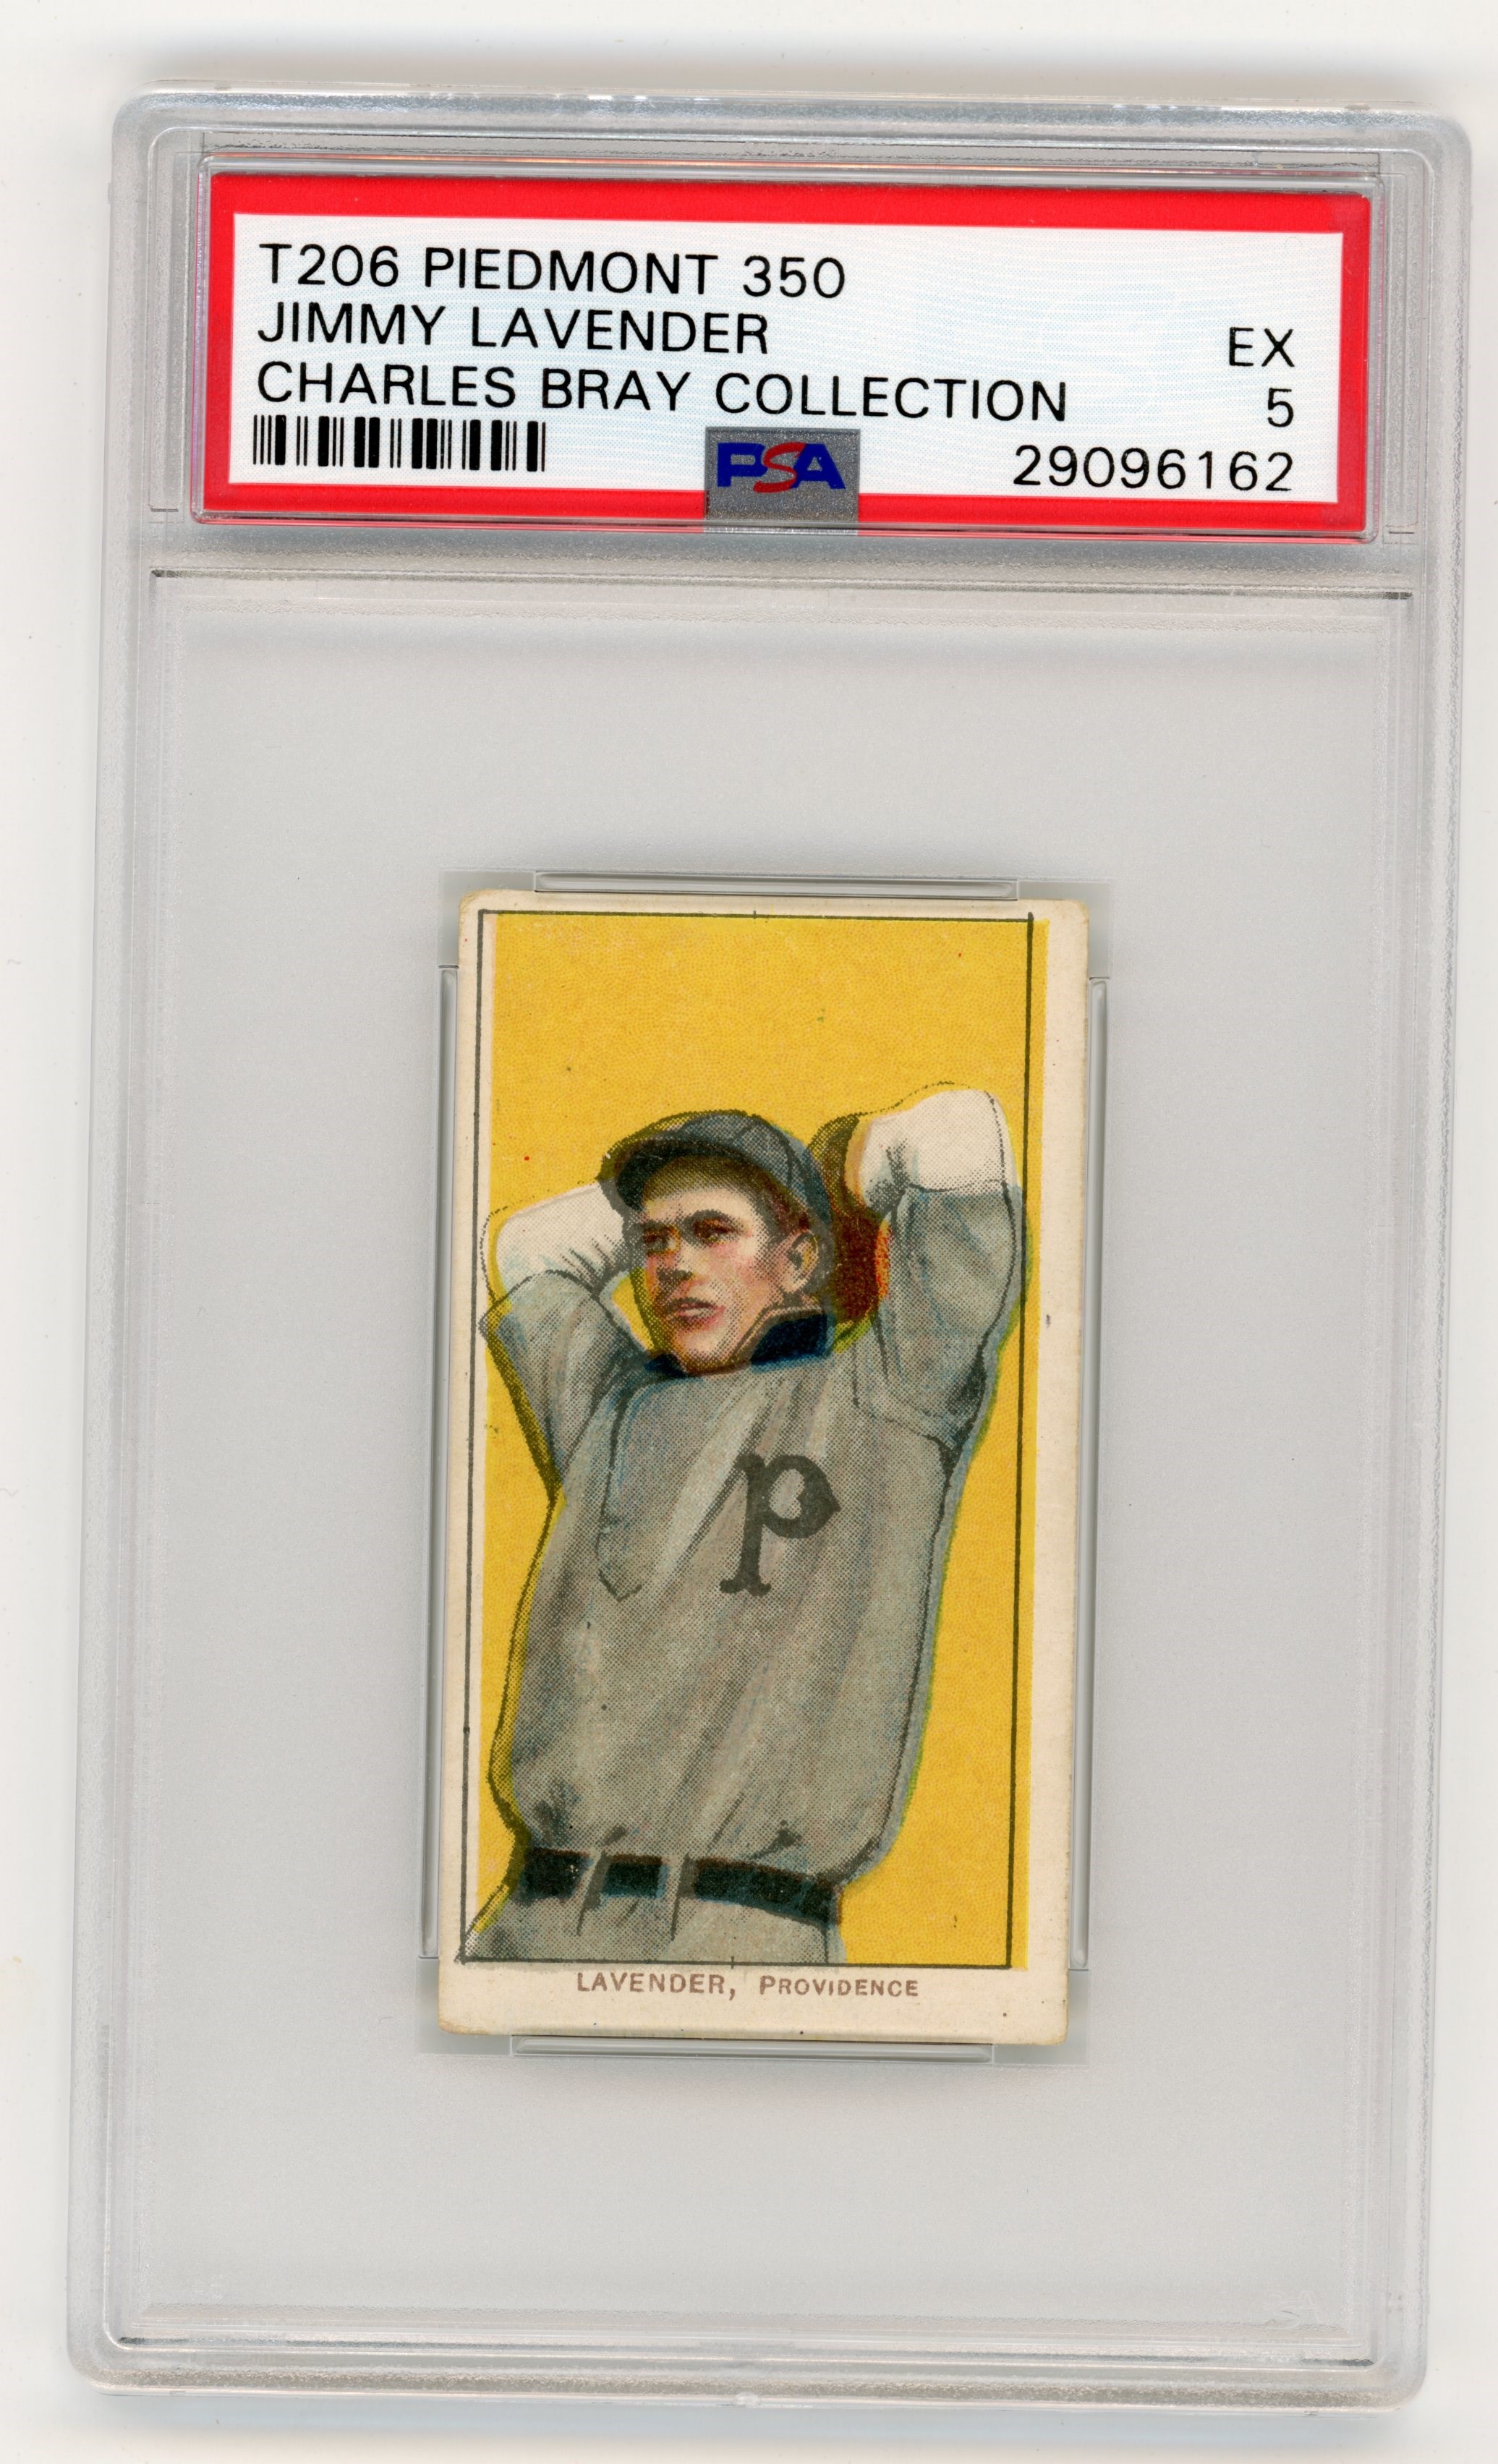 Baseball and Trading Cards - T206 Piedmont 350 Jimmy Lavender PSA EX 5 From the Charles Bray Collection.